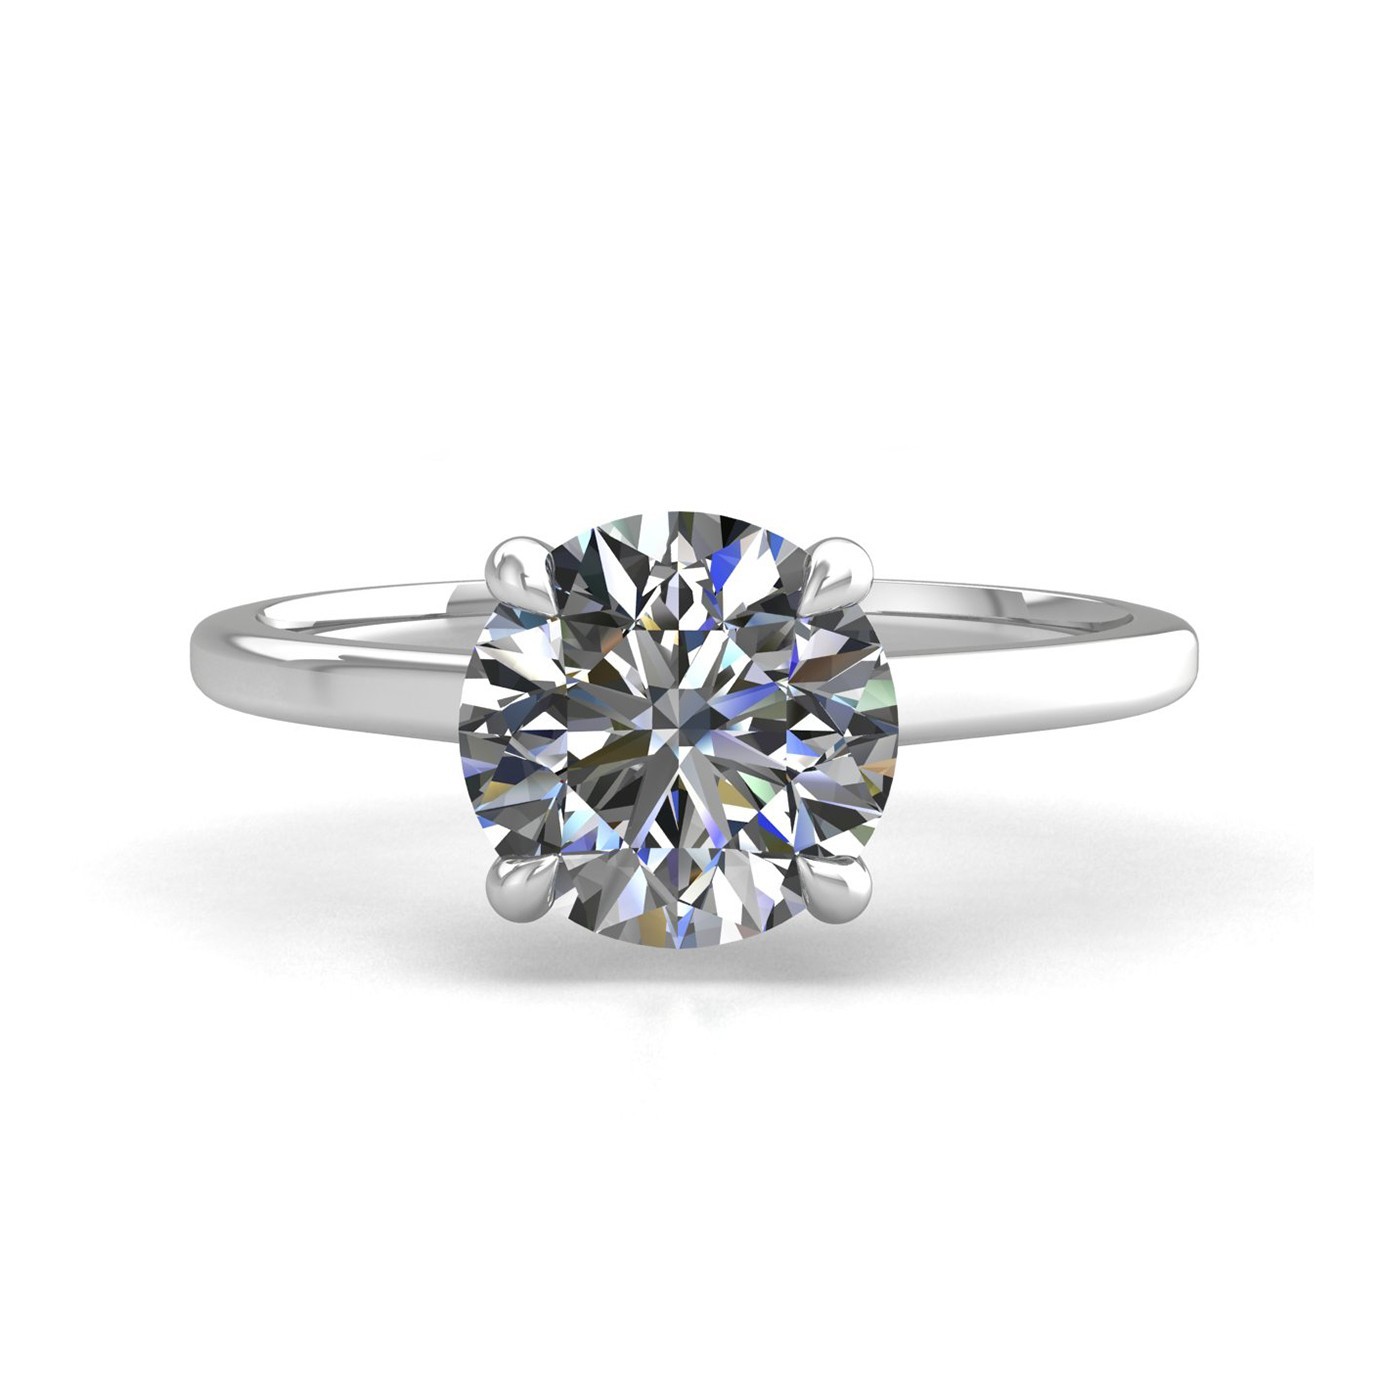 18k white gold 1.2ct 4 prongs solitaire round cut diamond engagement ring with whisper thin band Photos & images